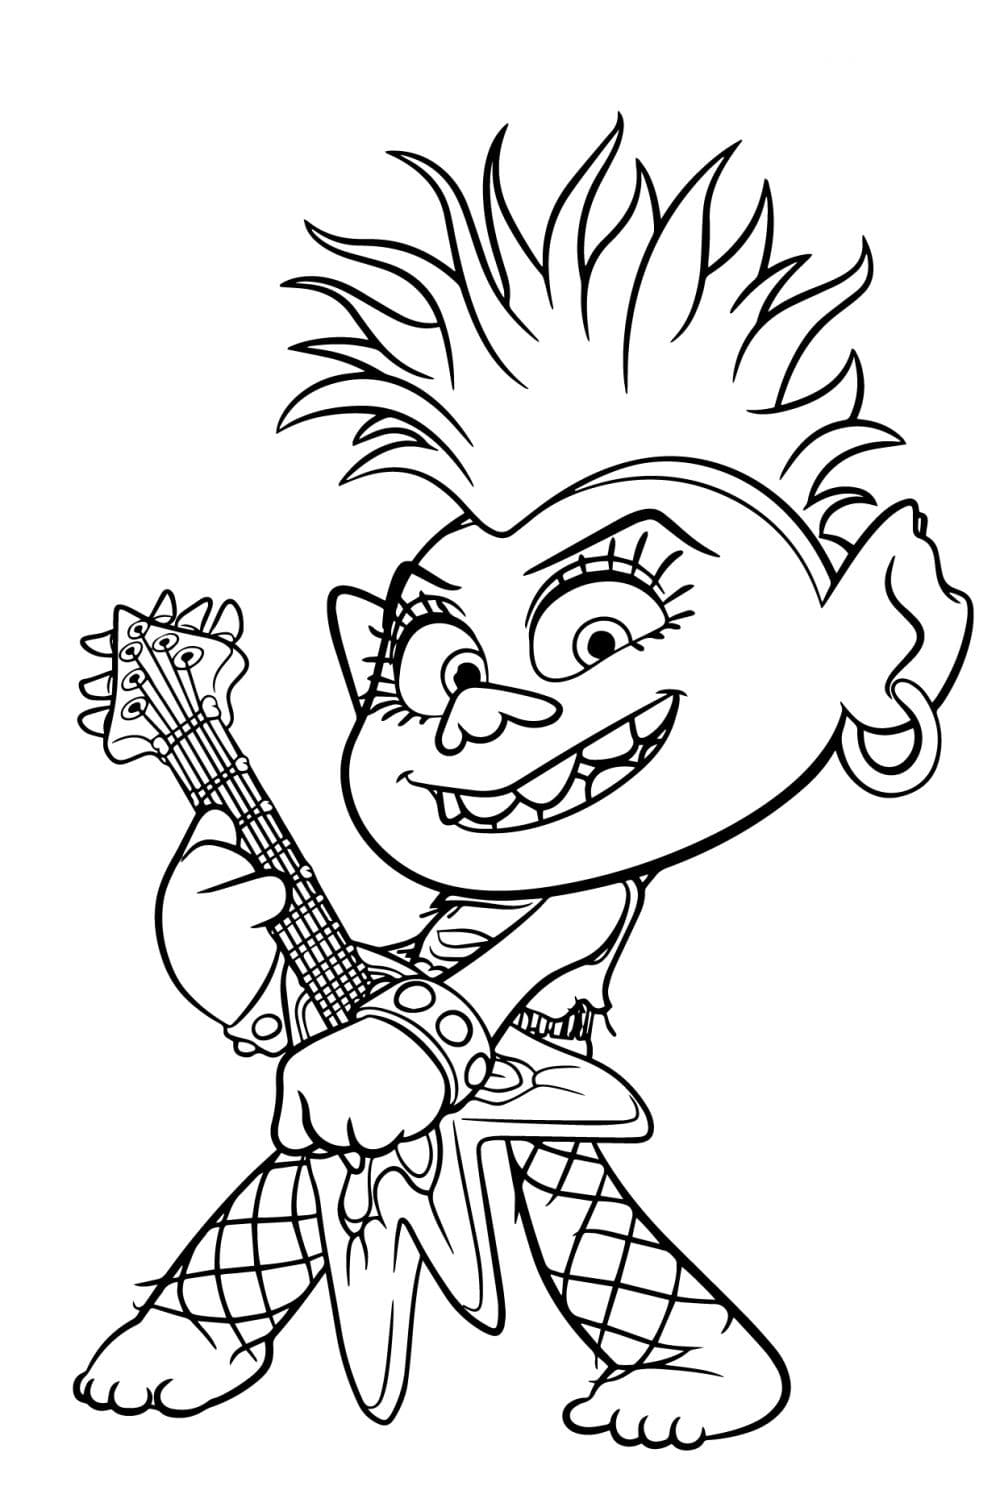 Les Trolls Bard coloring page